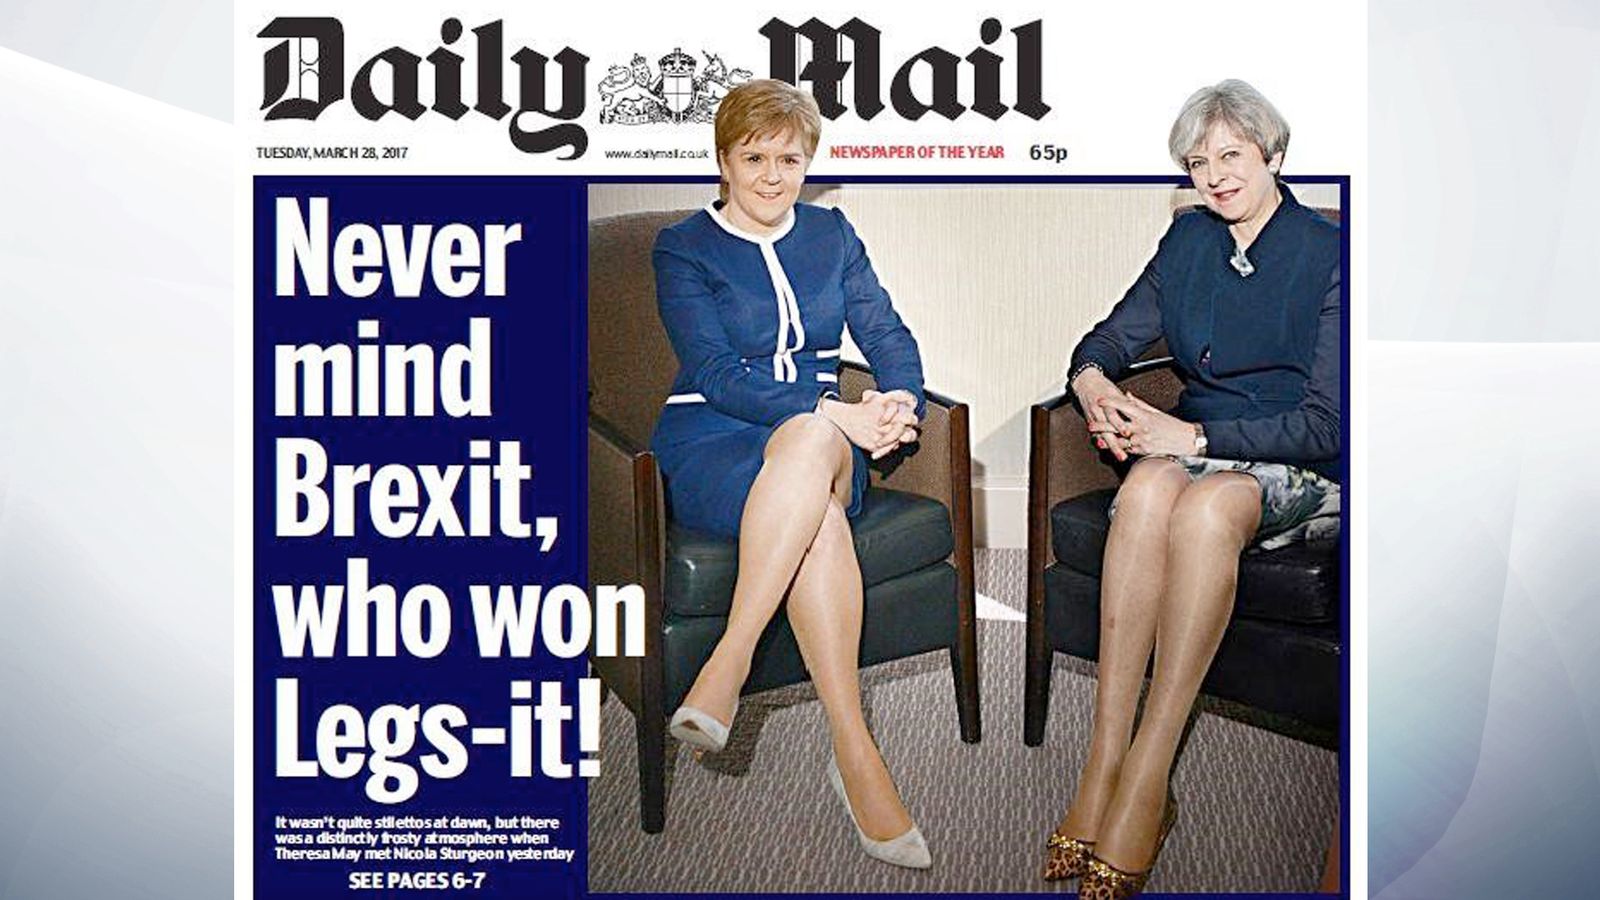 Daily Mails Sexist Legs It Headline Sparks Anger But Pm Says She 9249